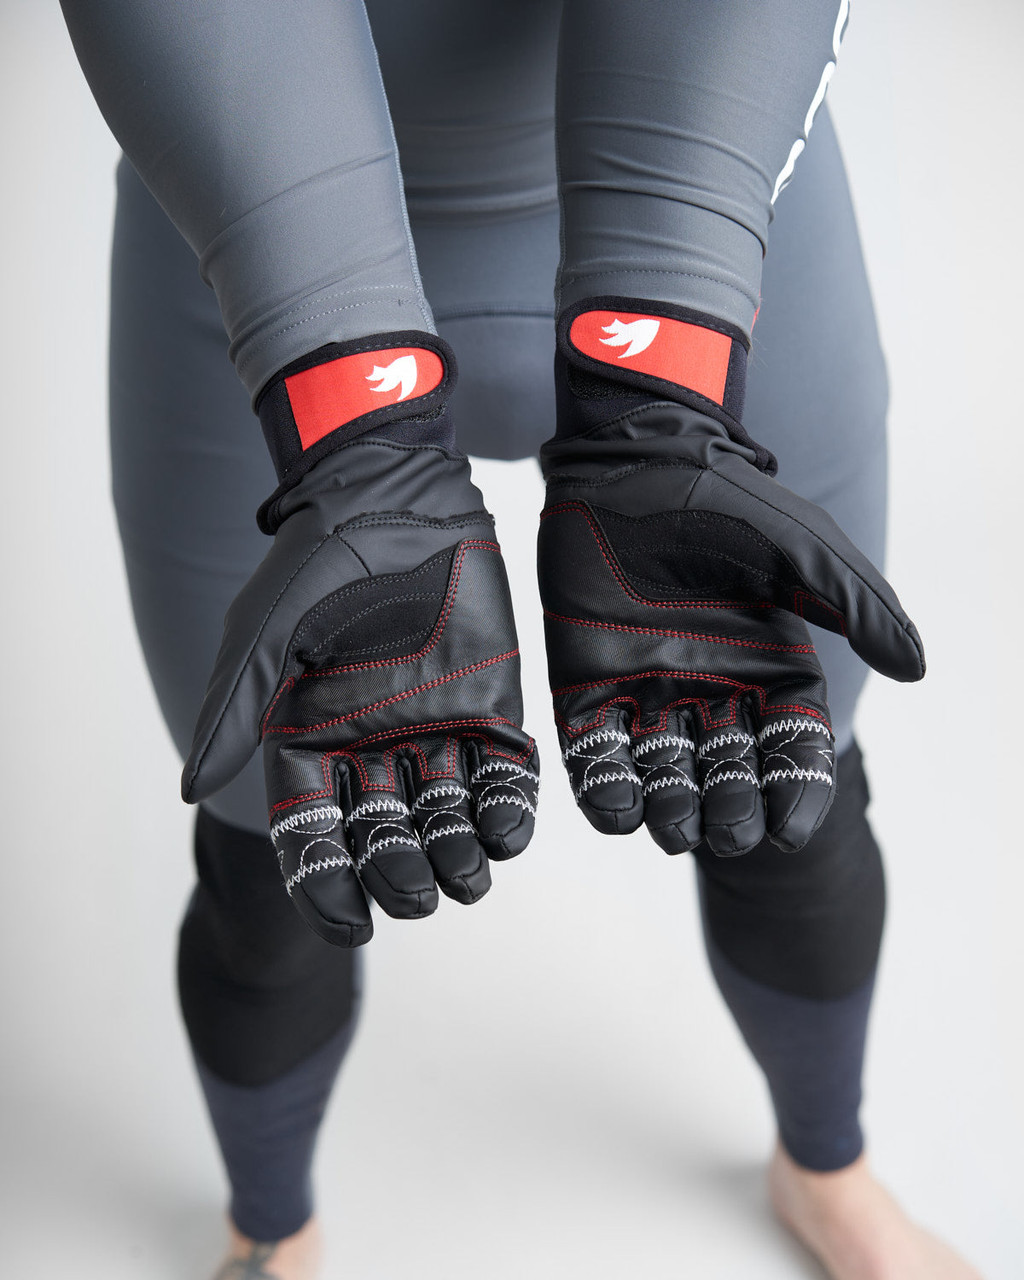 AquaPro Glove – ROOSTER USA